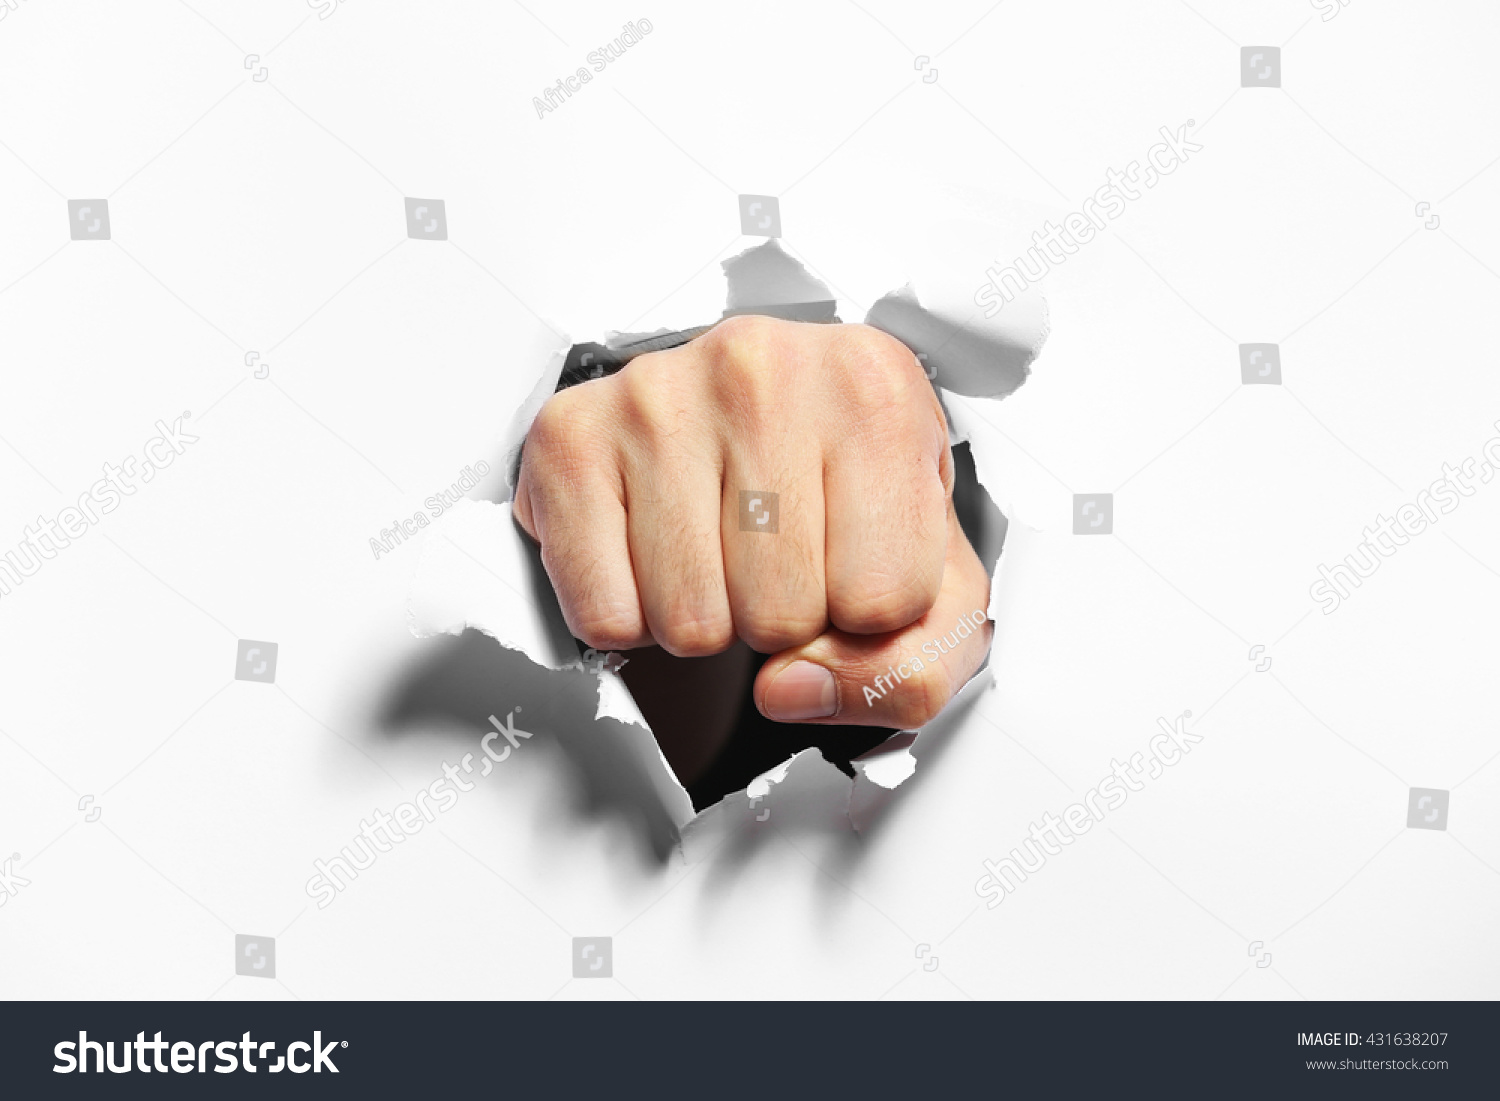 Male fist punching through paper, isolated on white #431638207